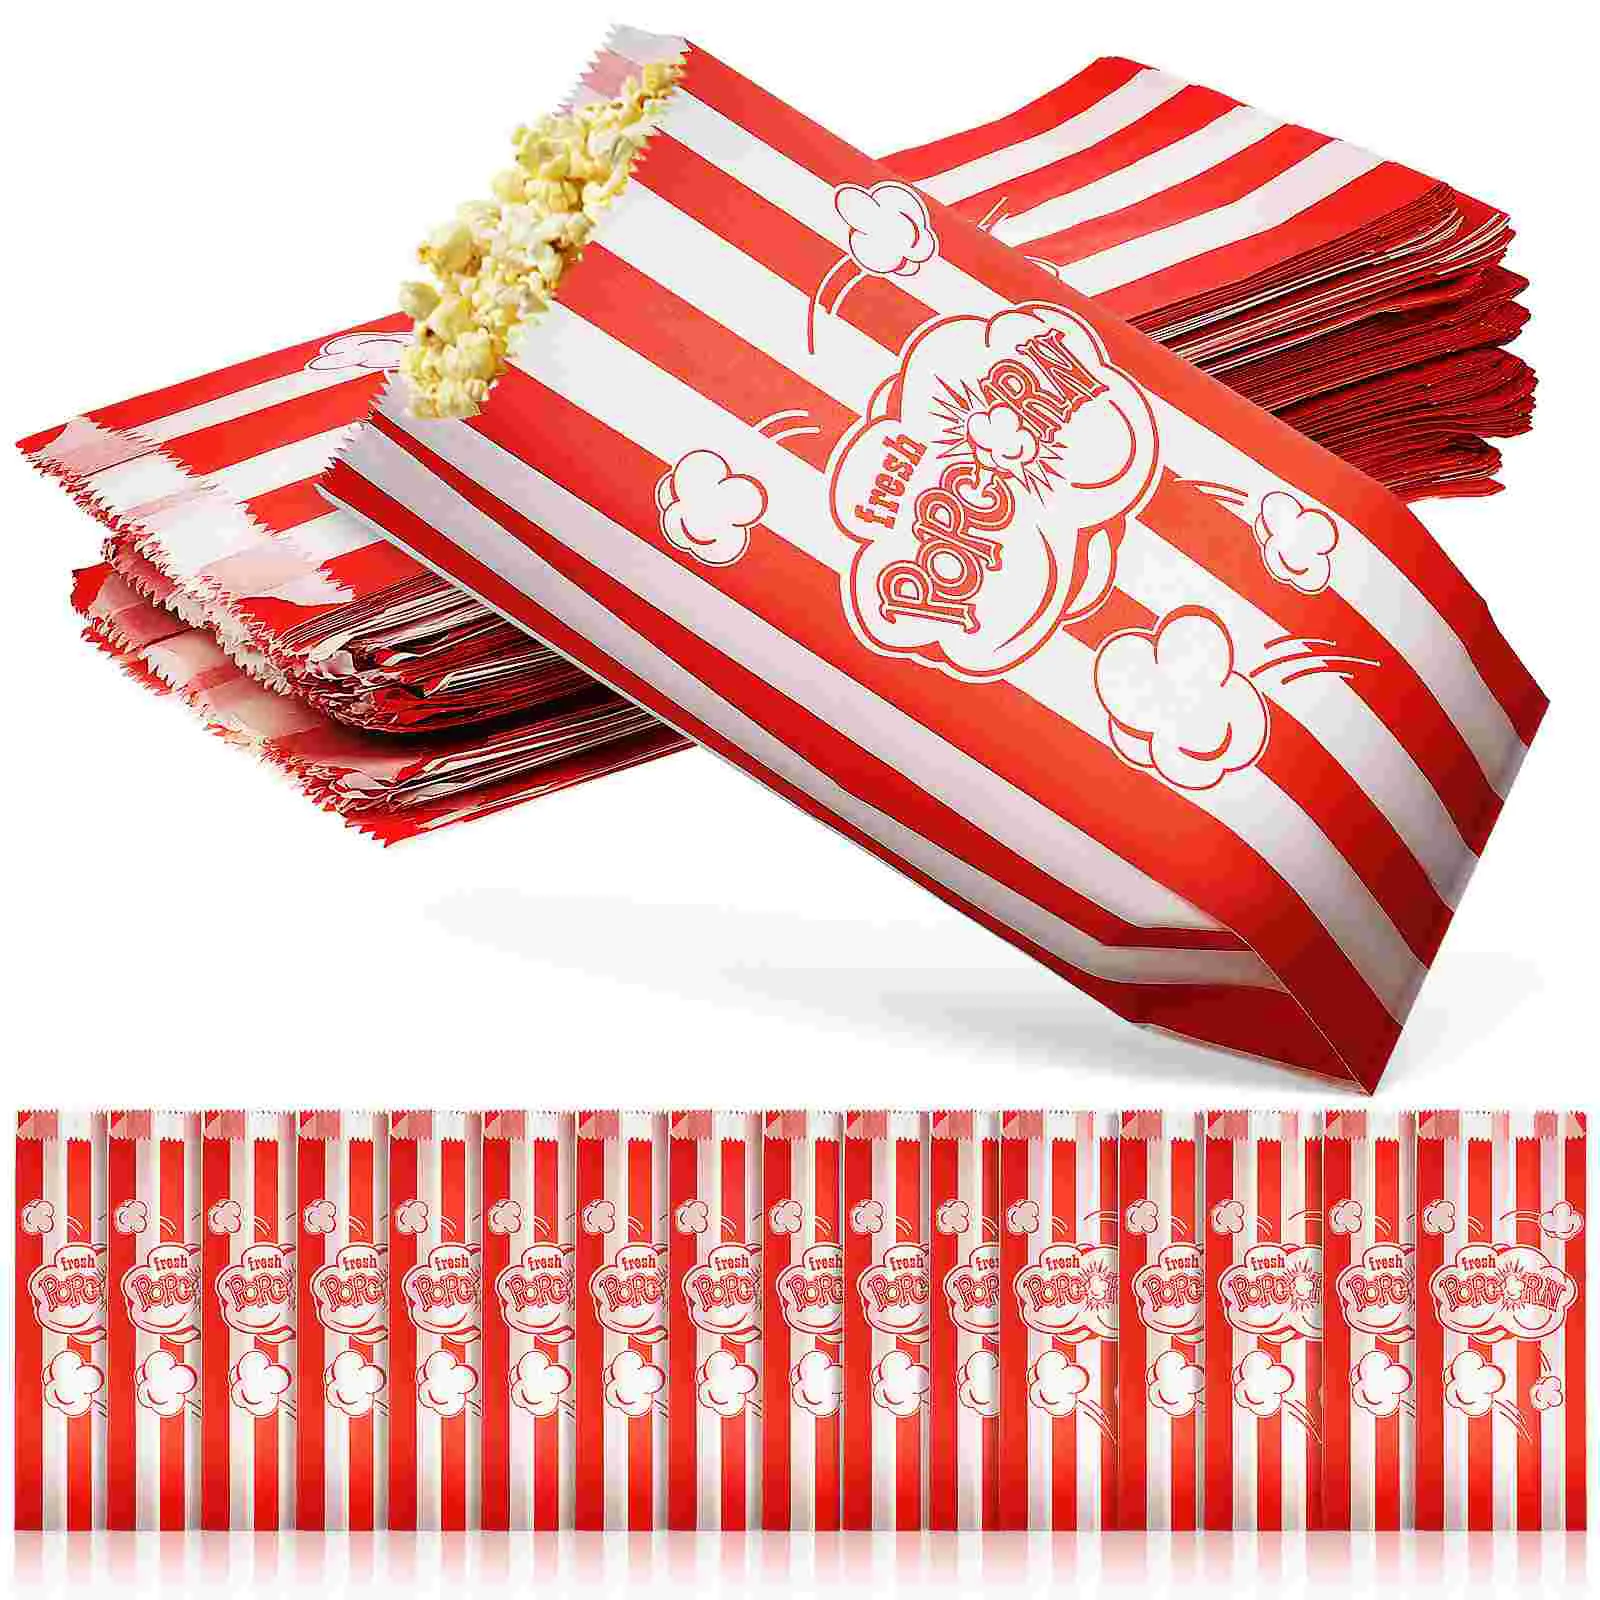 

100 Pcs Popcorn Bags Paper Letter Pattern Stripe Printed Treats Bags for Popcorn Cookies Candy